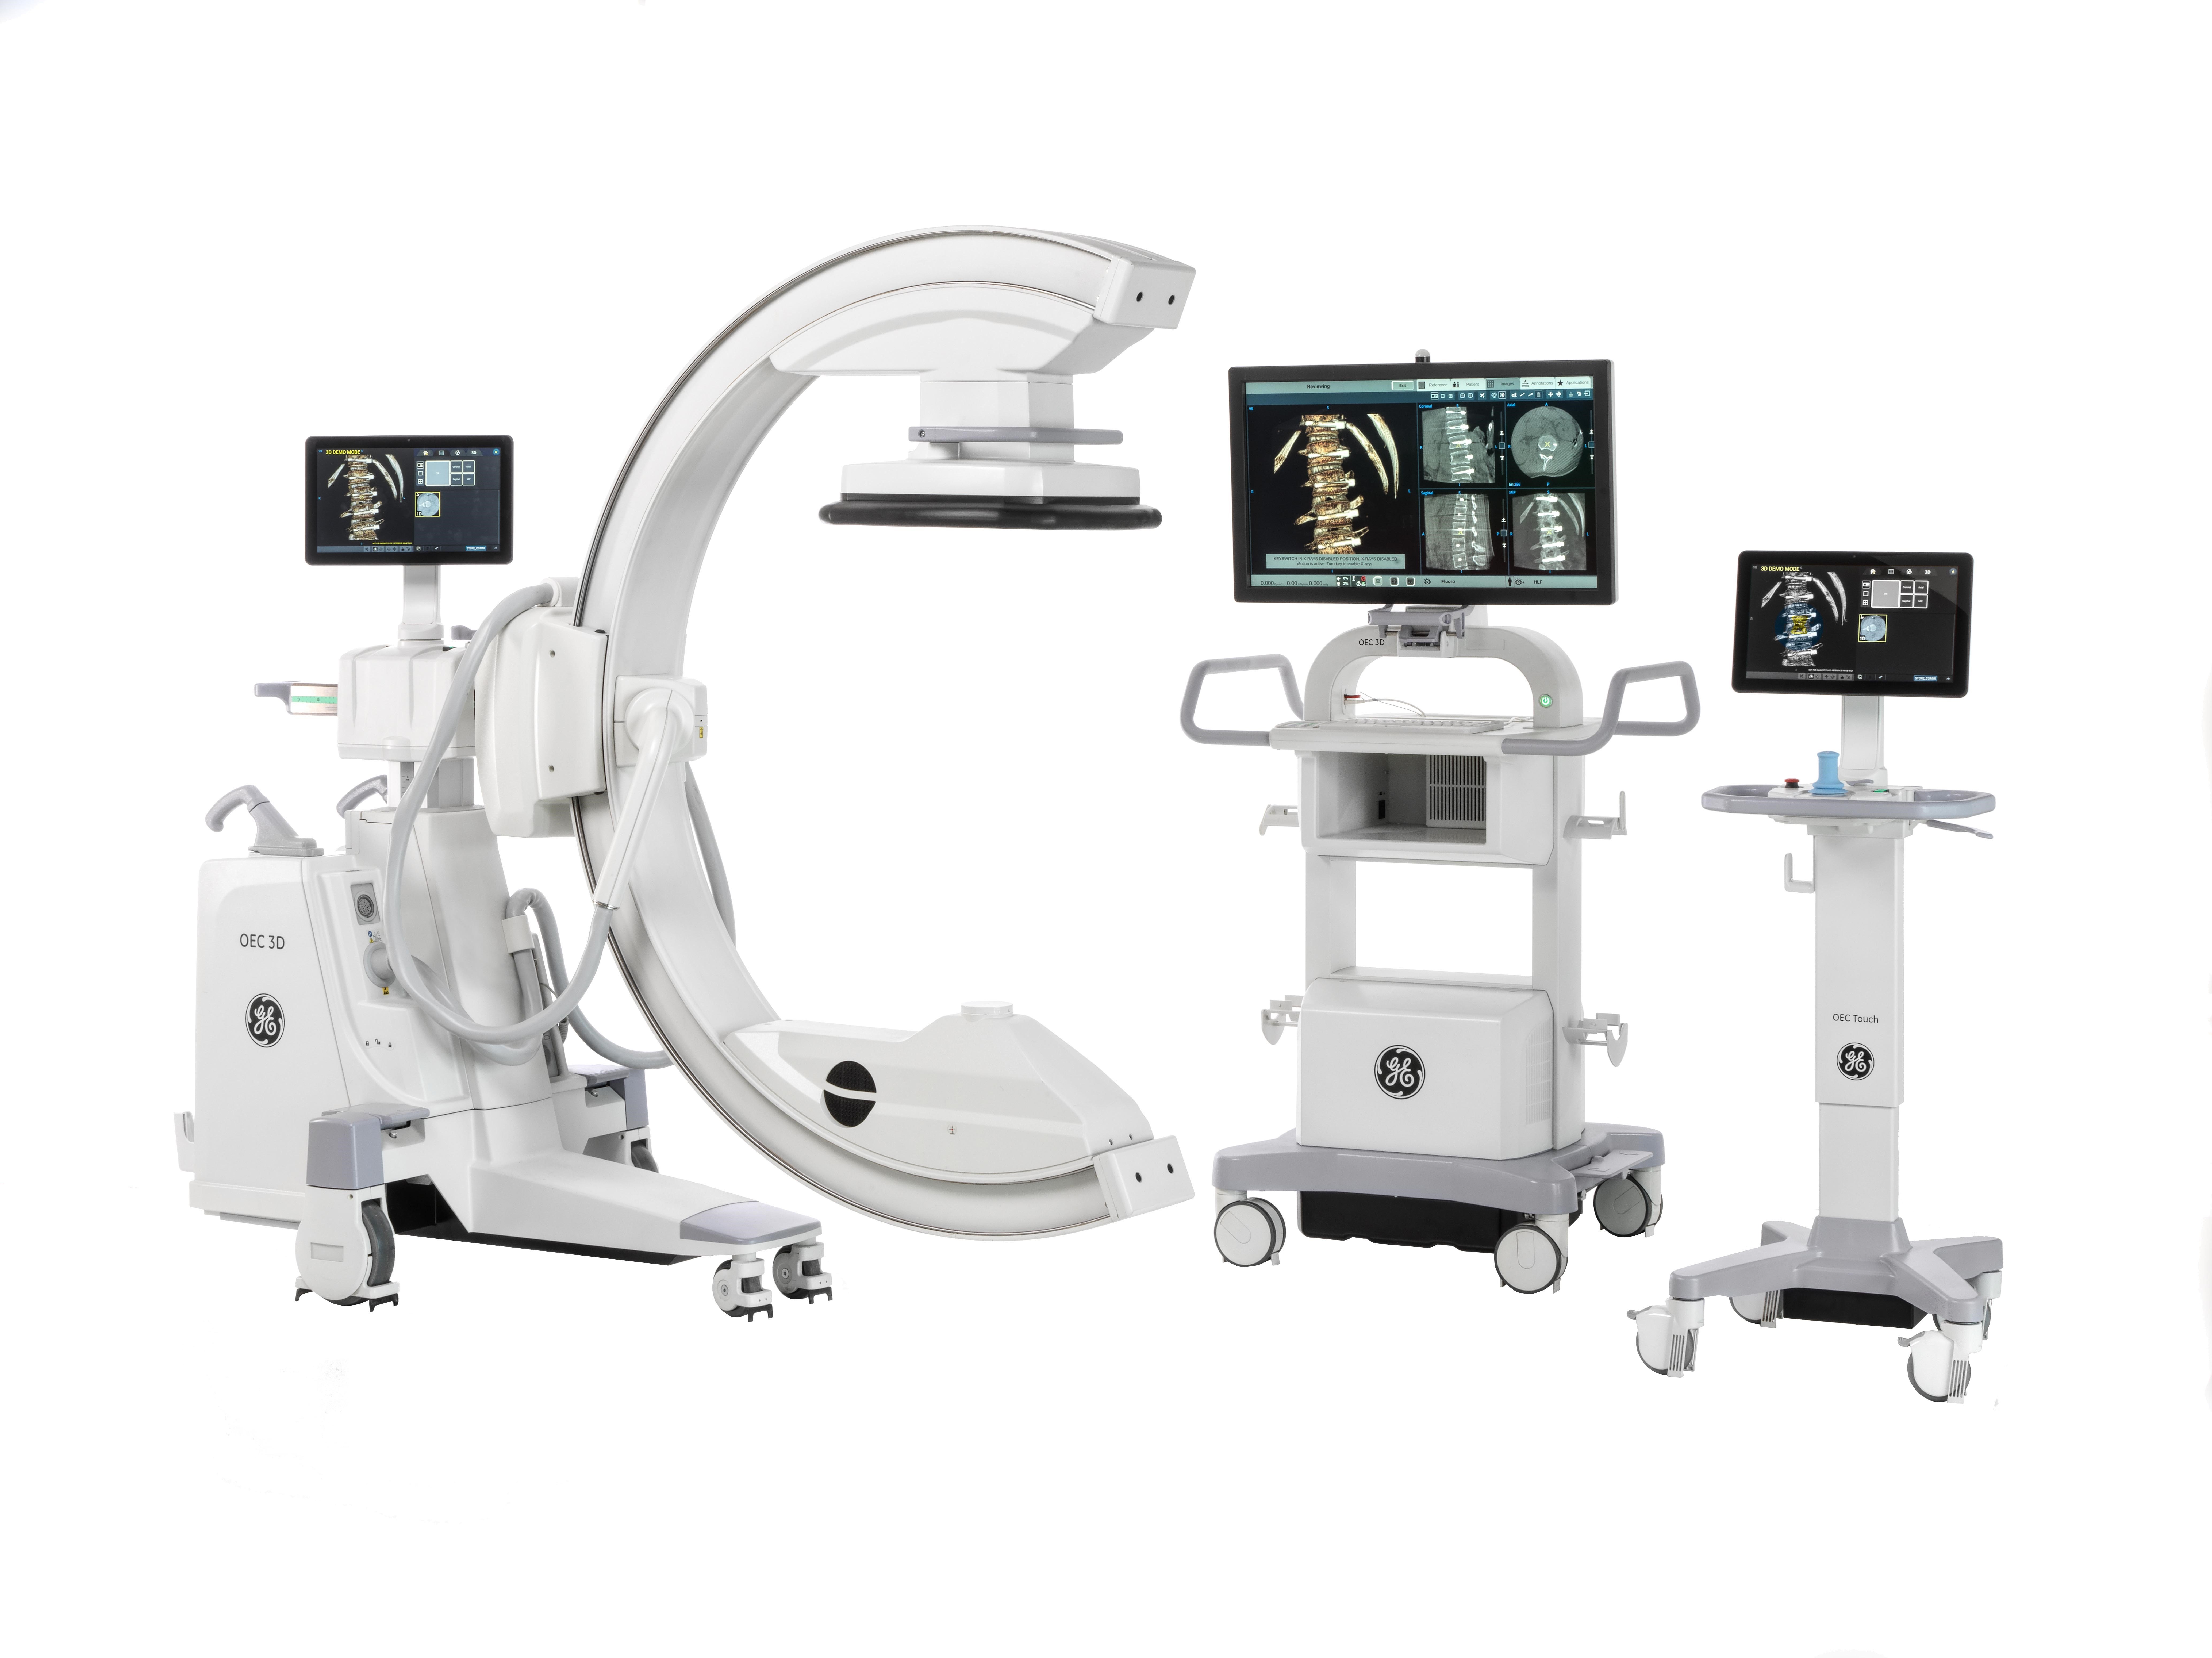 Mobile C-arms have seen several advances over the past decade, moving toward improved image quality, advanced imaging features and workflow improvements. Here are some recent advances